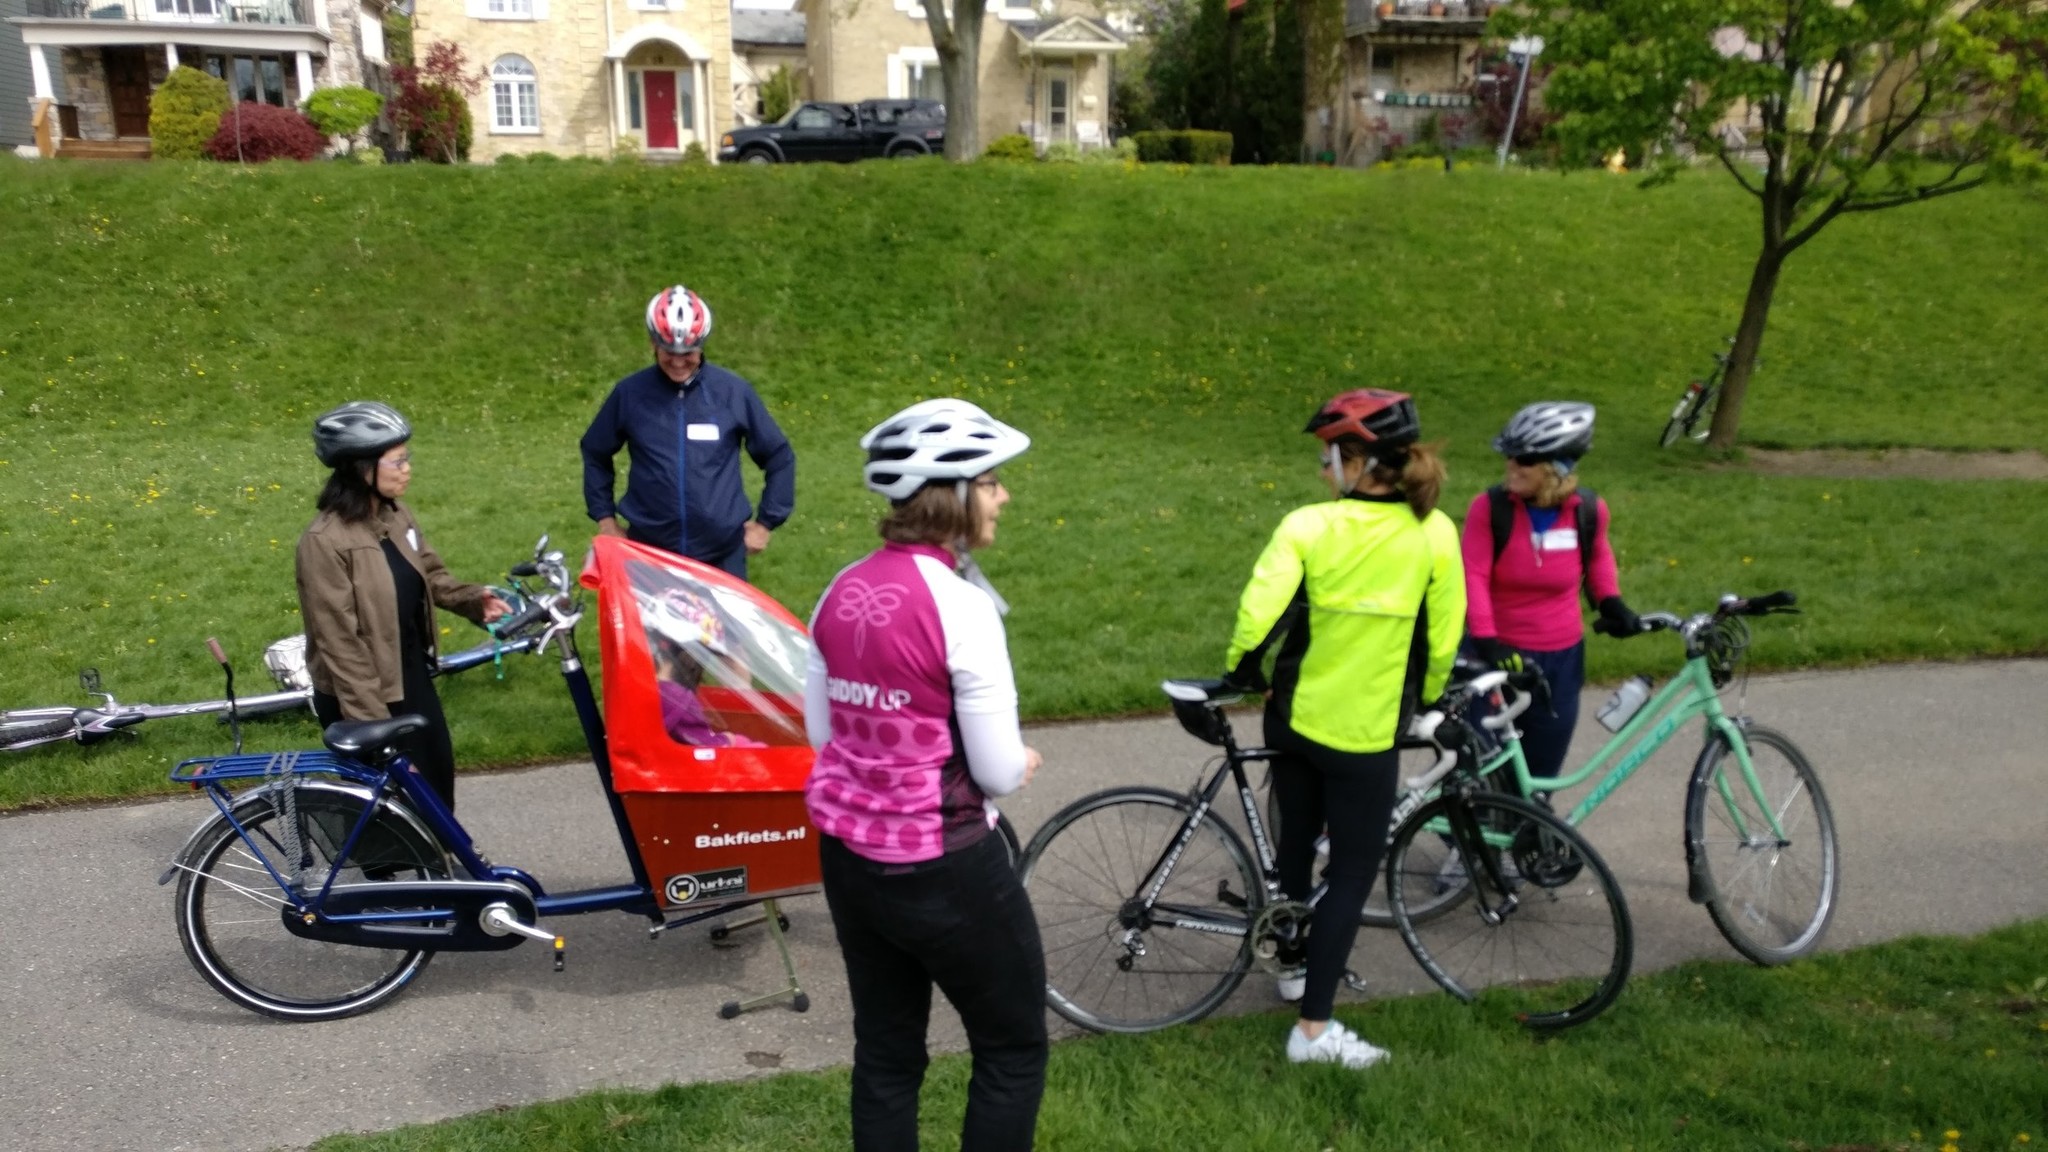 A group of cyclists stops to chat, they have a bakfiets box bike among other more typical bikes.